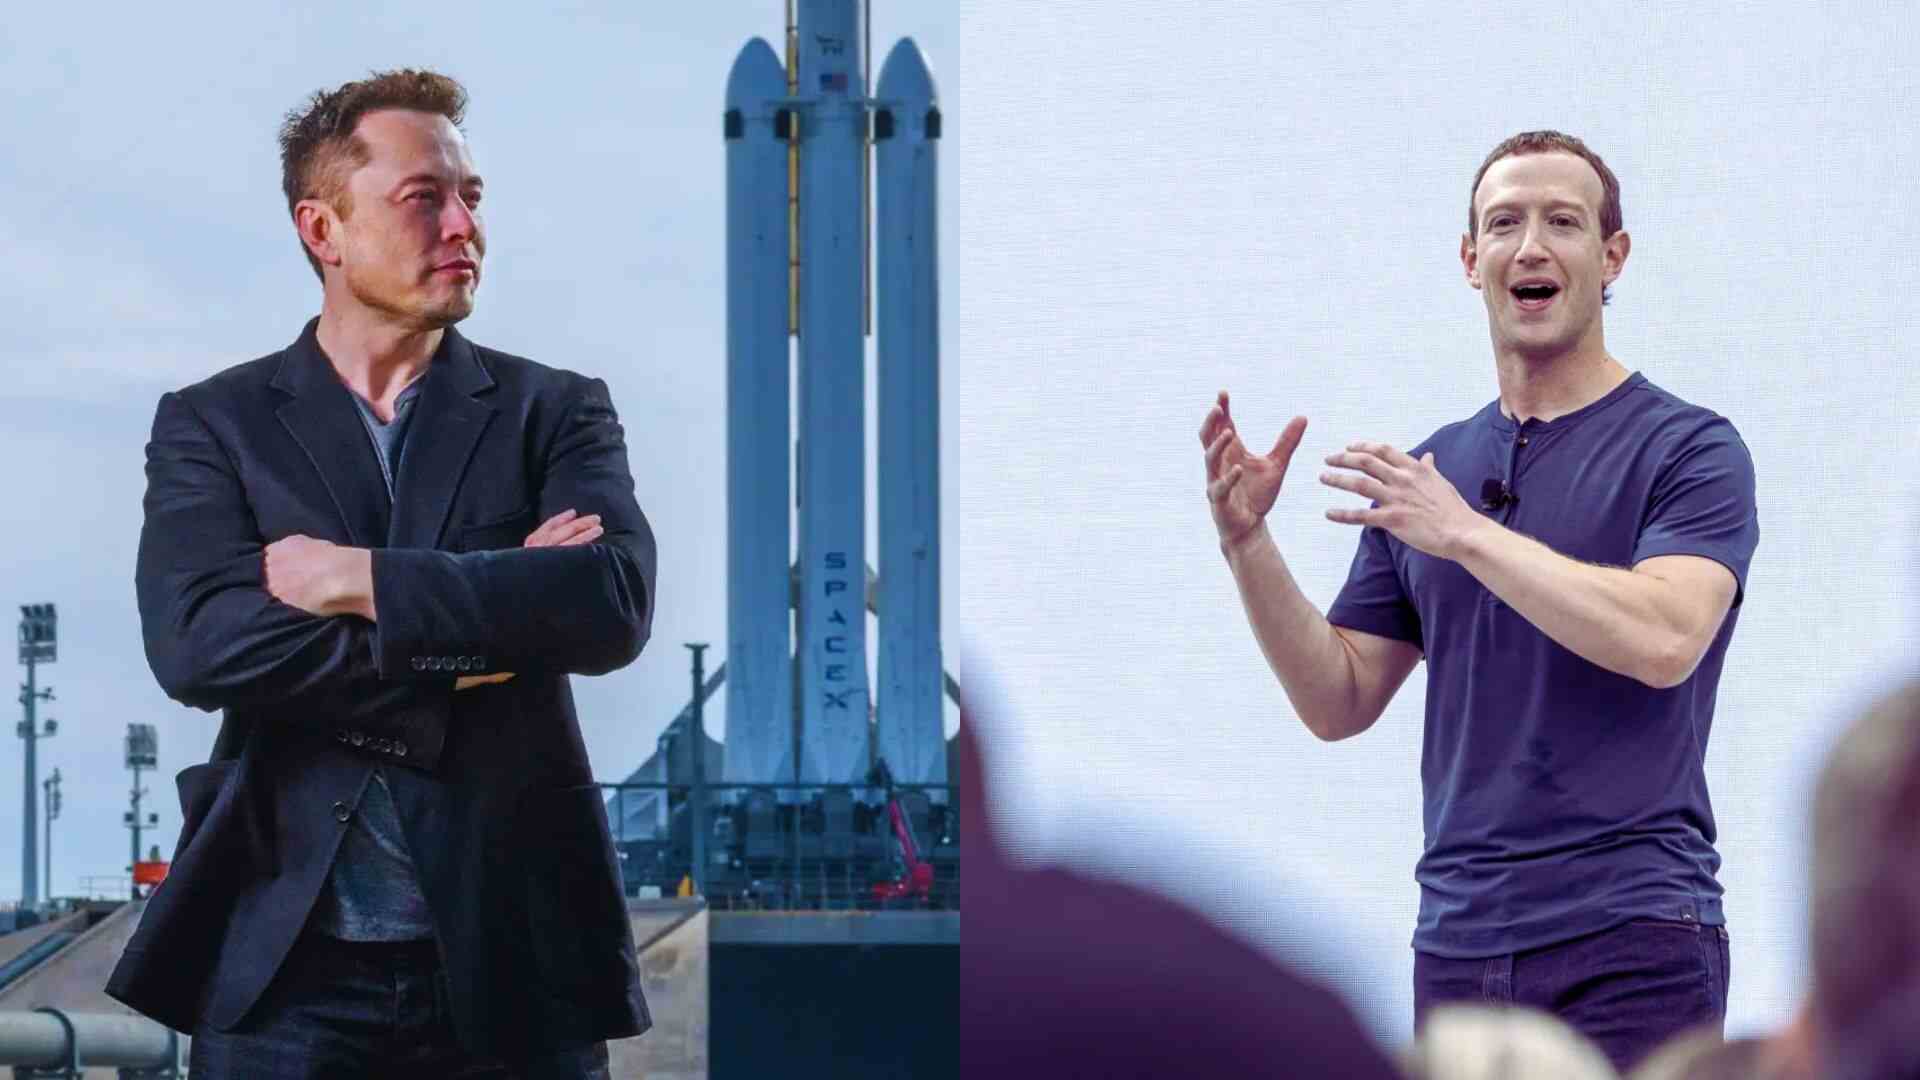 ‘Are We Really Doing This Again?’ Is The Elon Musk Vs. Zuckerberg Fight Back On The Table?